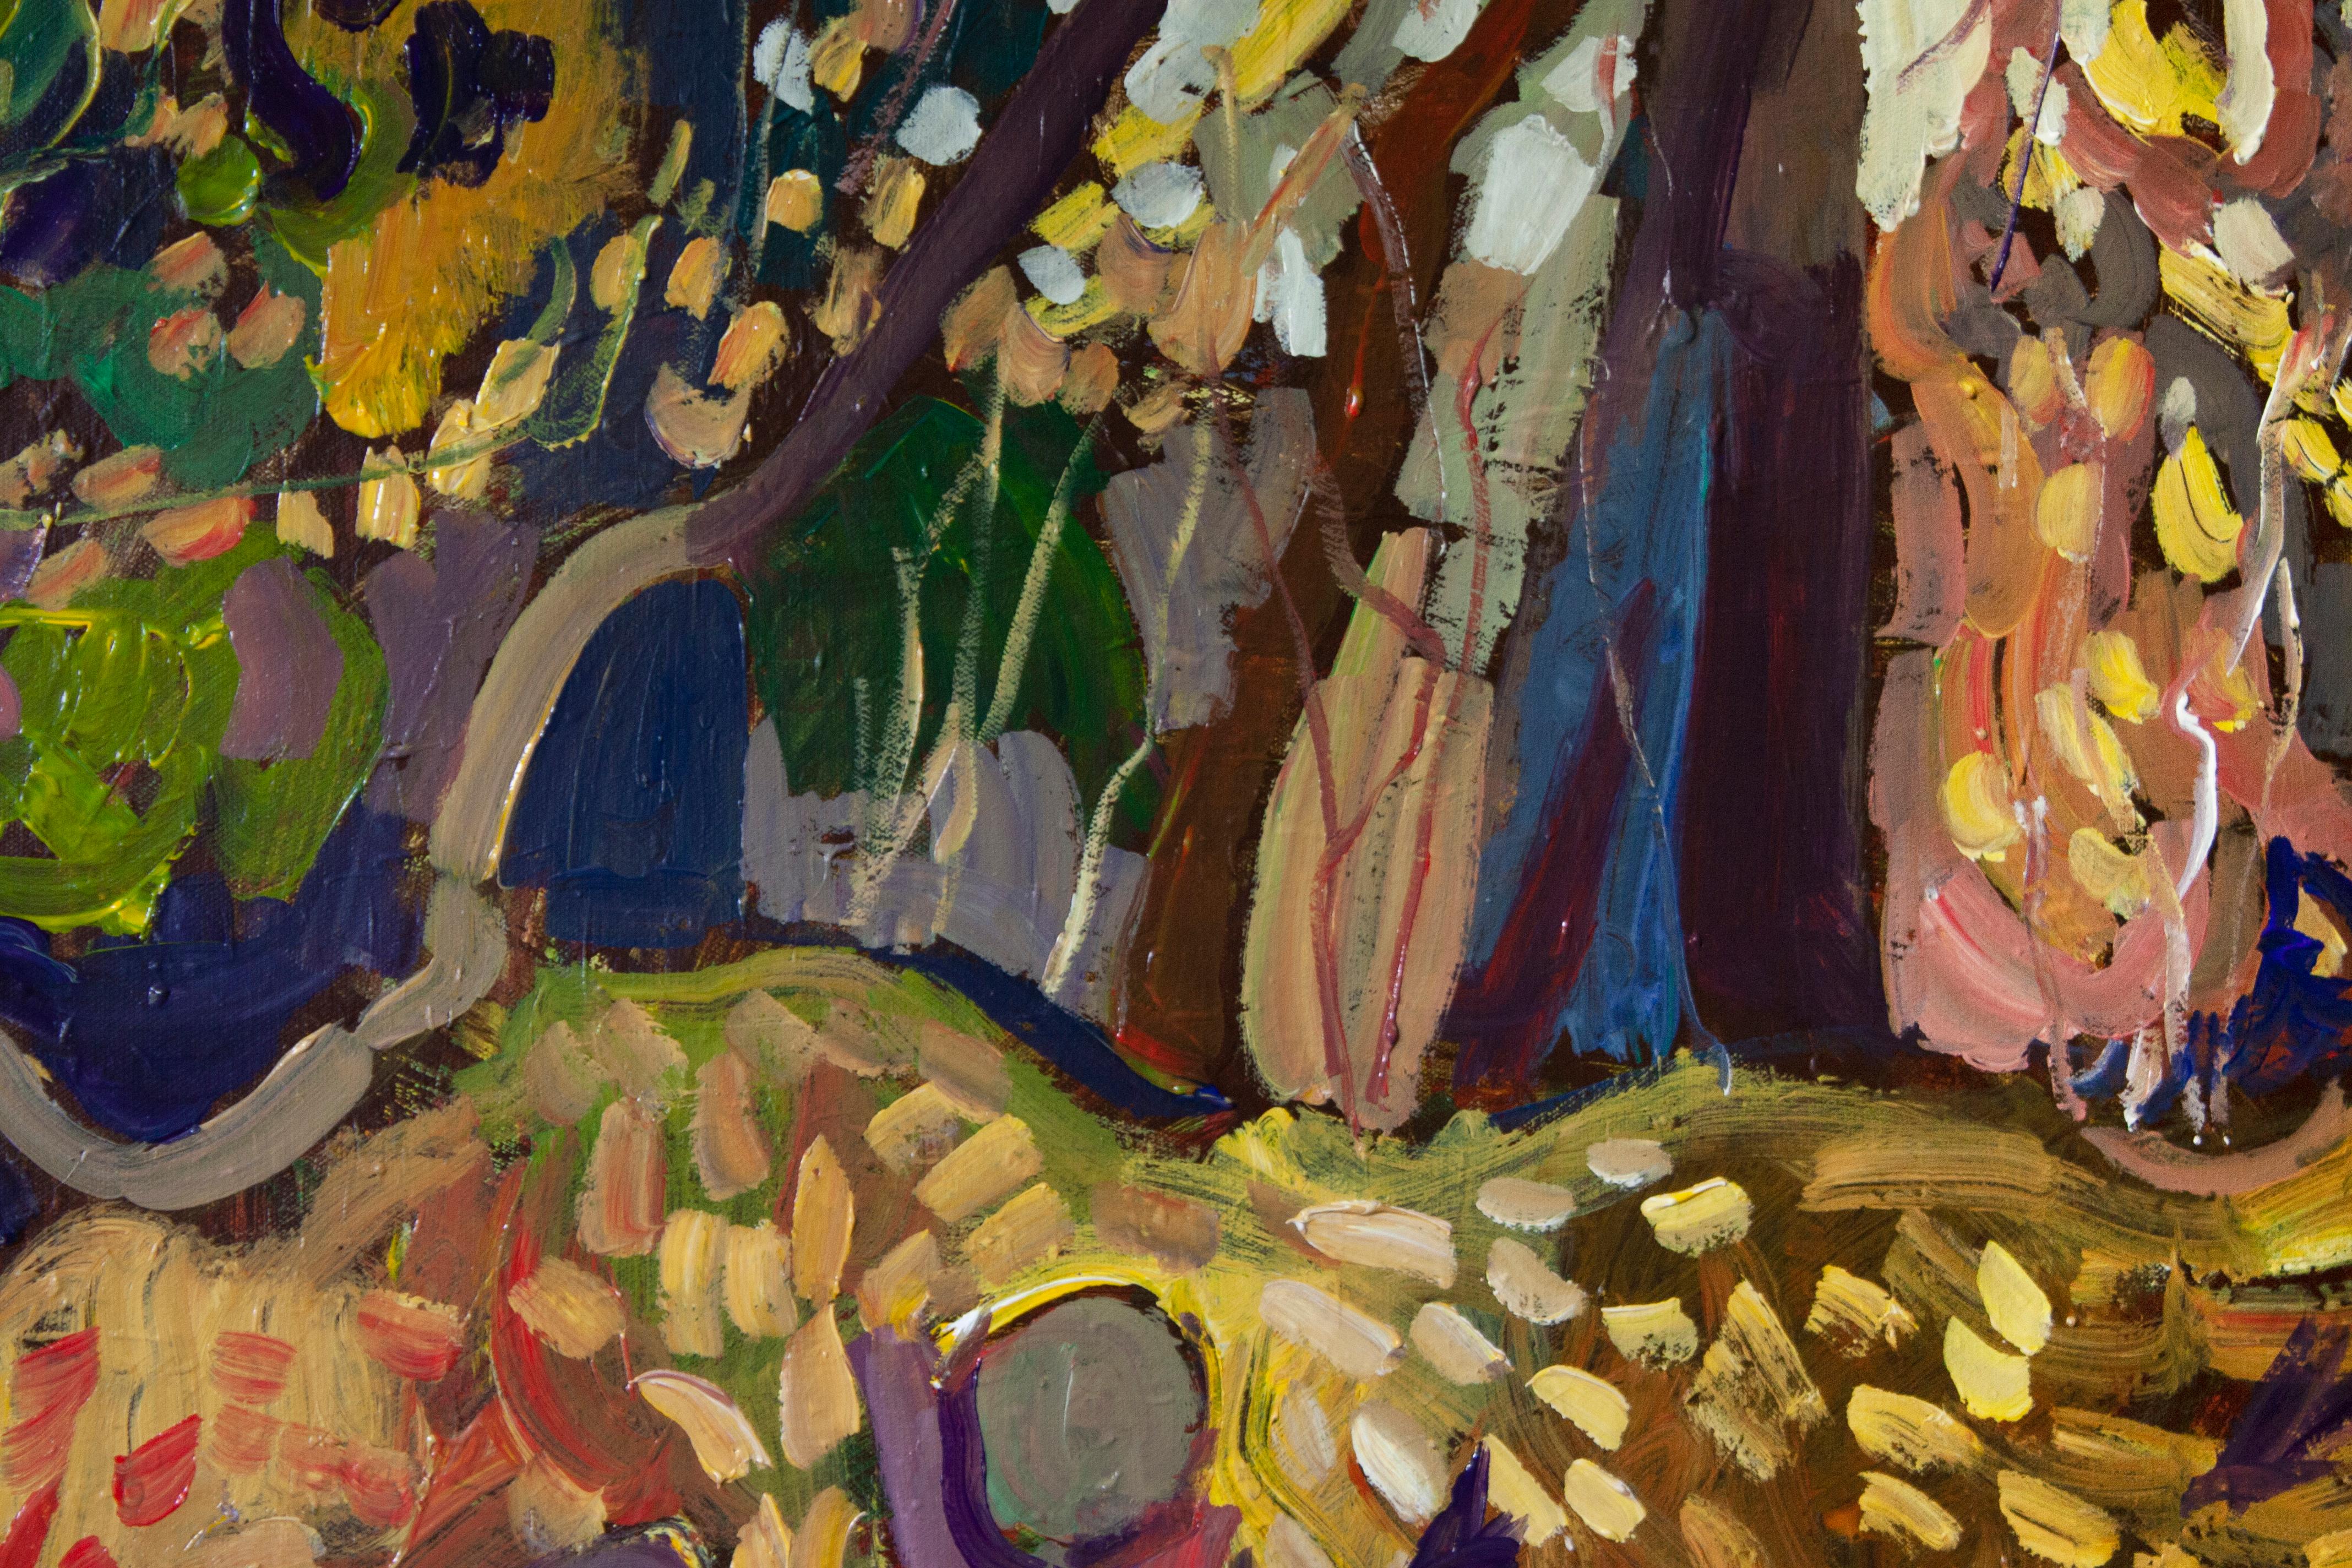 <p>Artist Comments<br>Artist Robert Hofherr says he drew inspiration for this semi-abstract scene from the landscape paintings of English artist Ivon Hitchens. Robert transformed a seasonal woodland with energetic brushwork and complex color